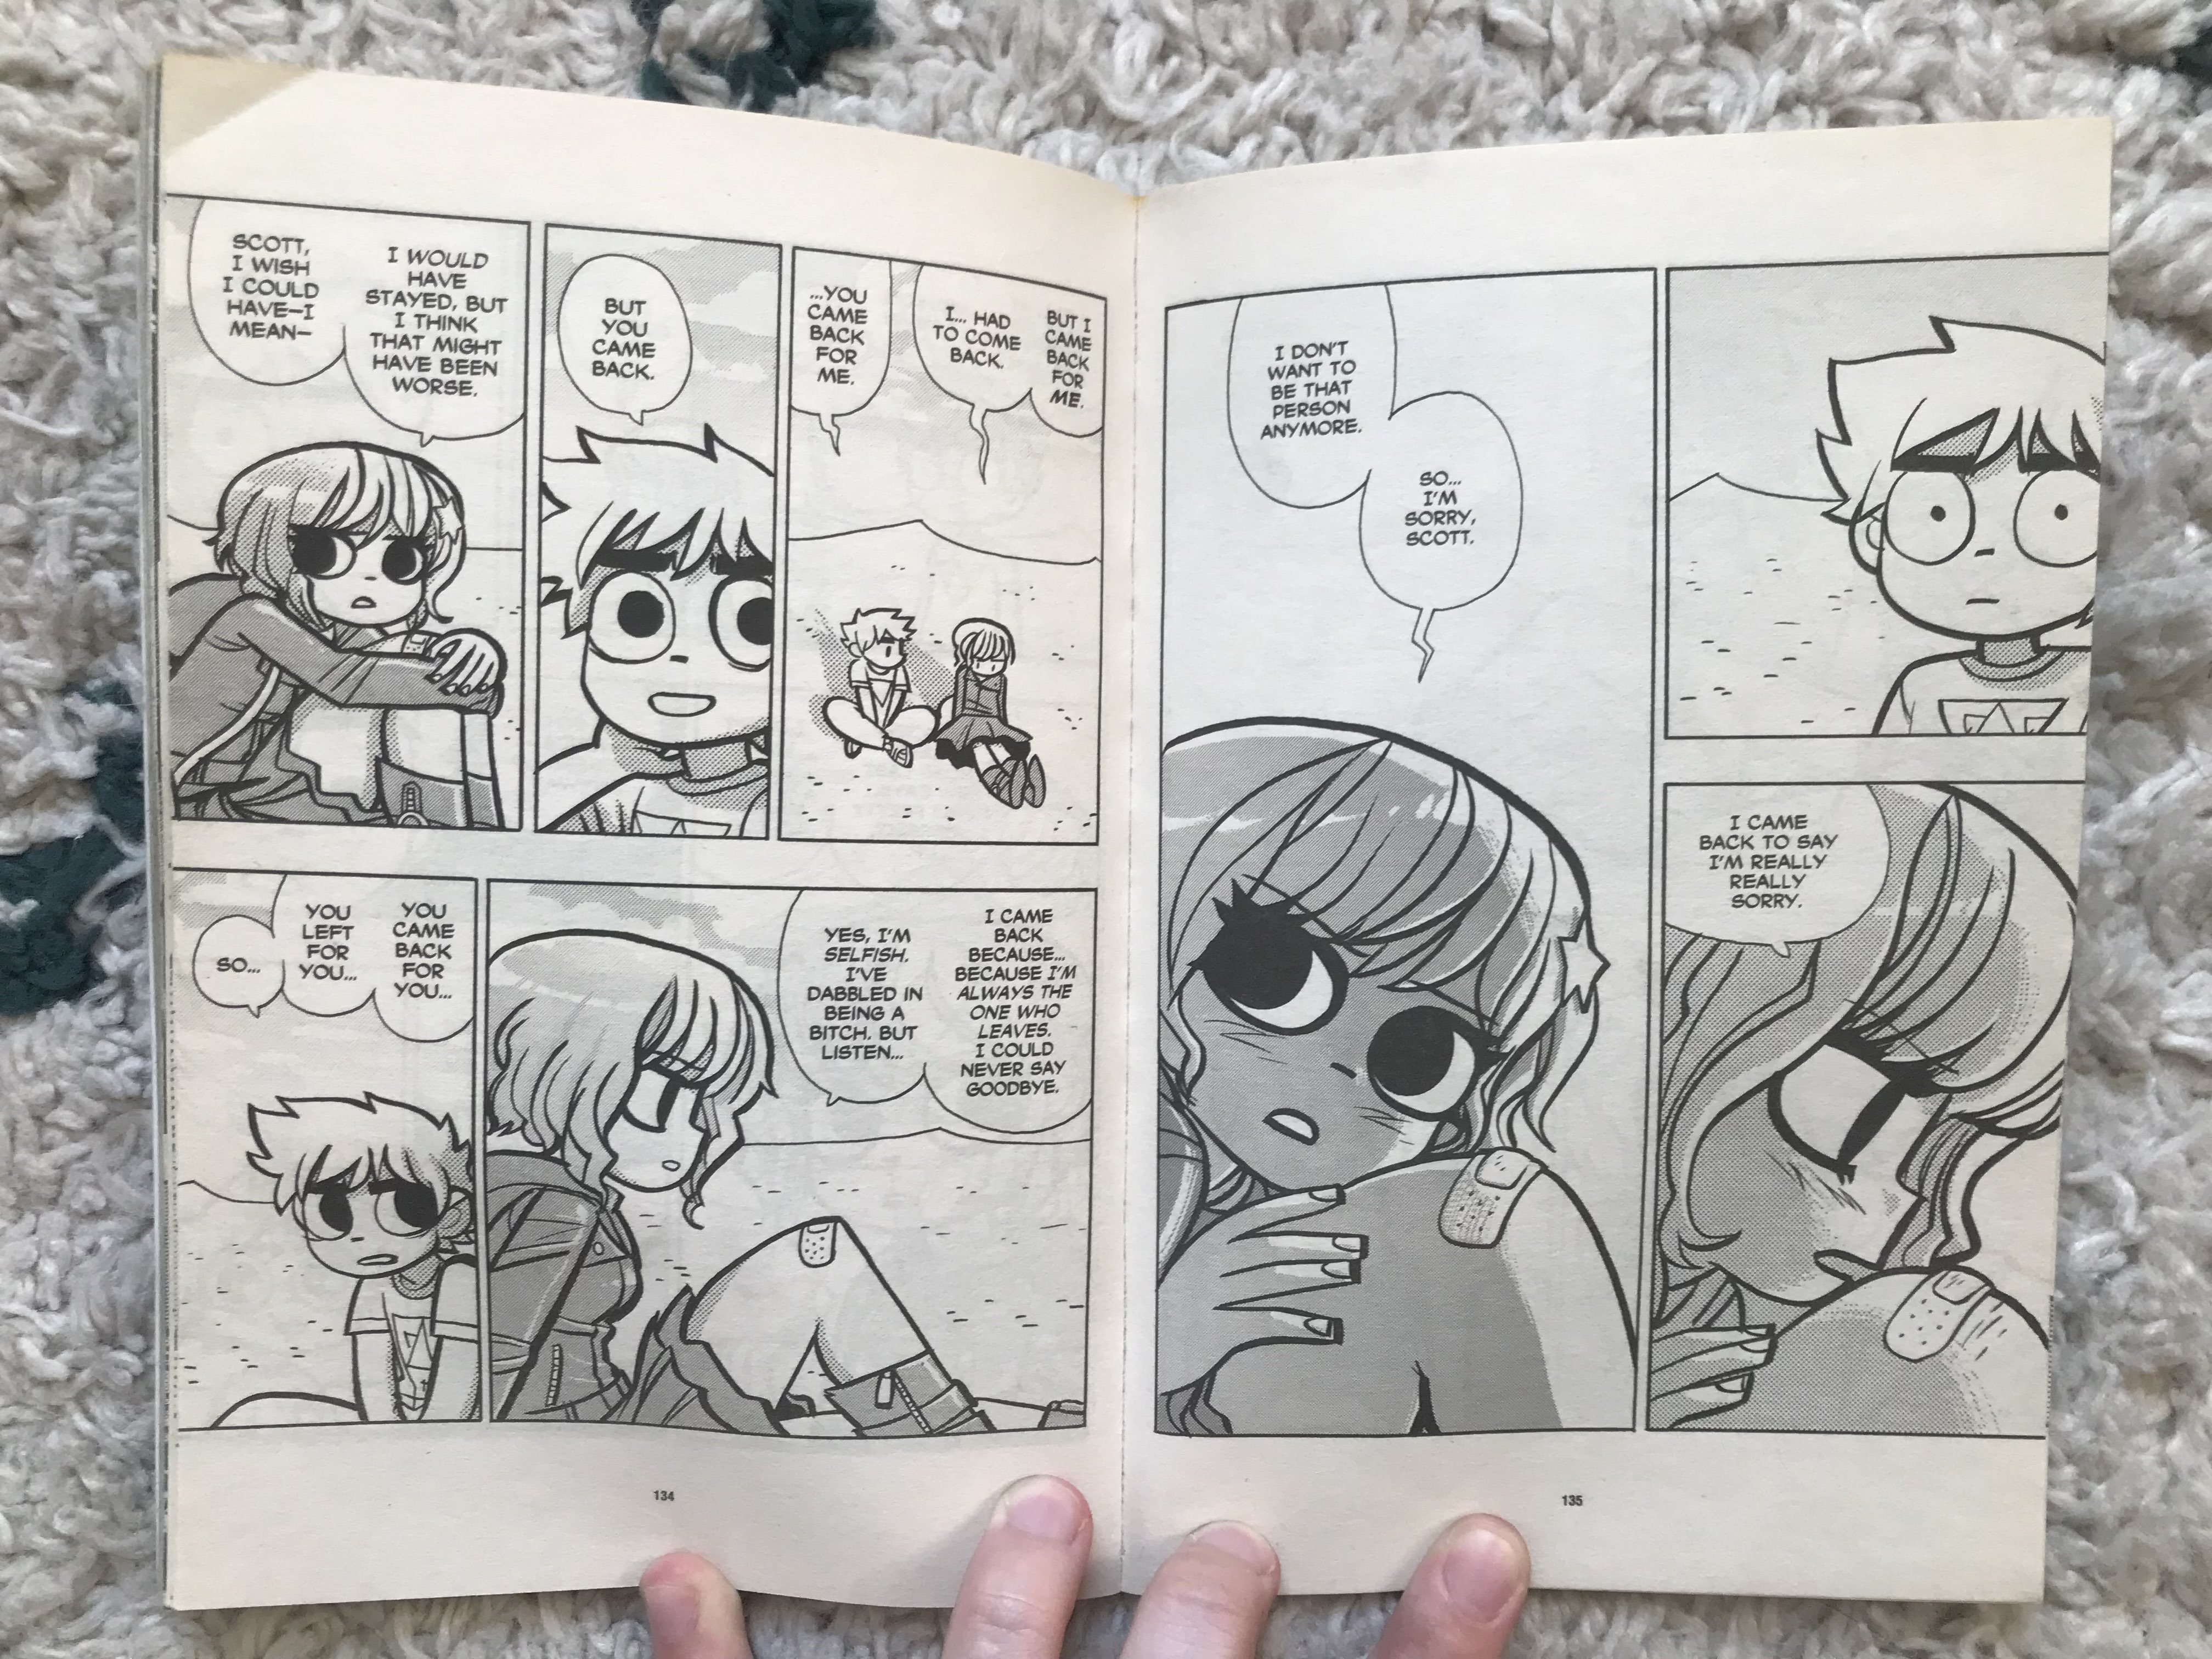 A photo of two pages from Scott Pilgrim, showing Ramona having an emotional conversationwith Scott in the dream world about her own flaws, why she left and why she came back